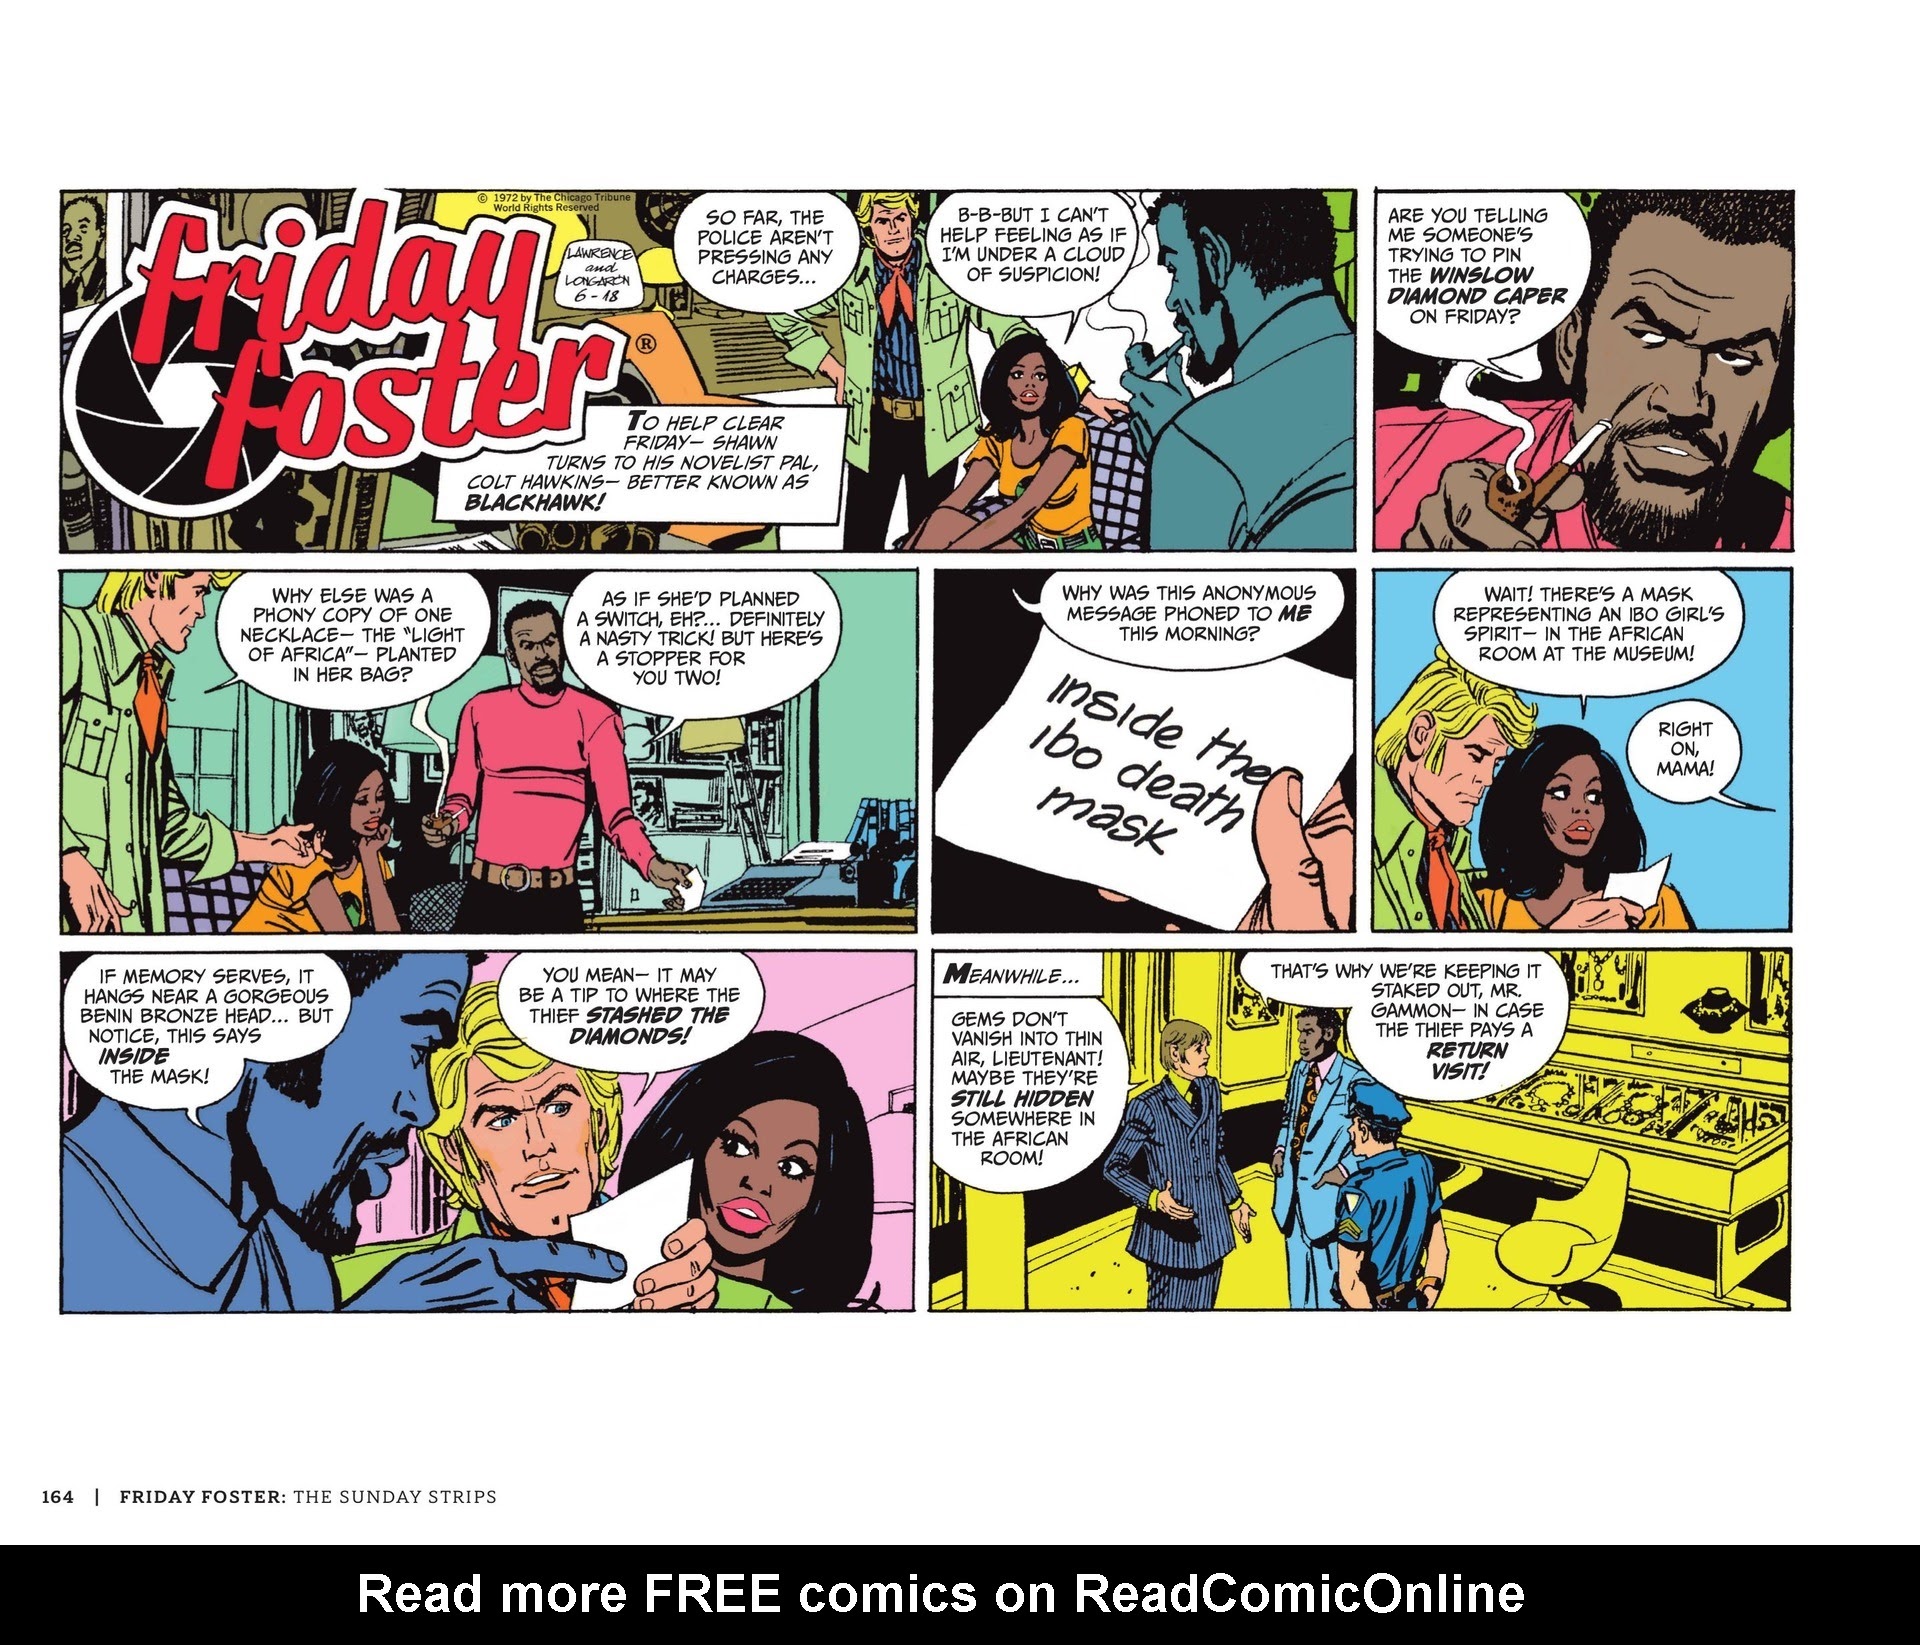 Read online Friday Foster: The Sunday Strips comic -  Issue # TPB (Part 2) - 65